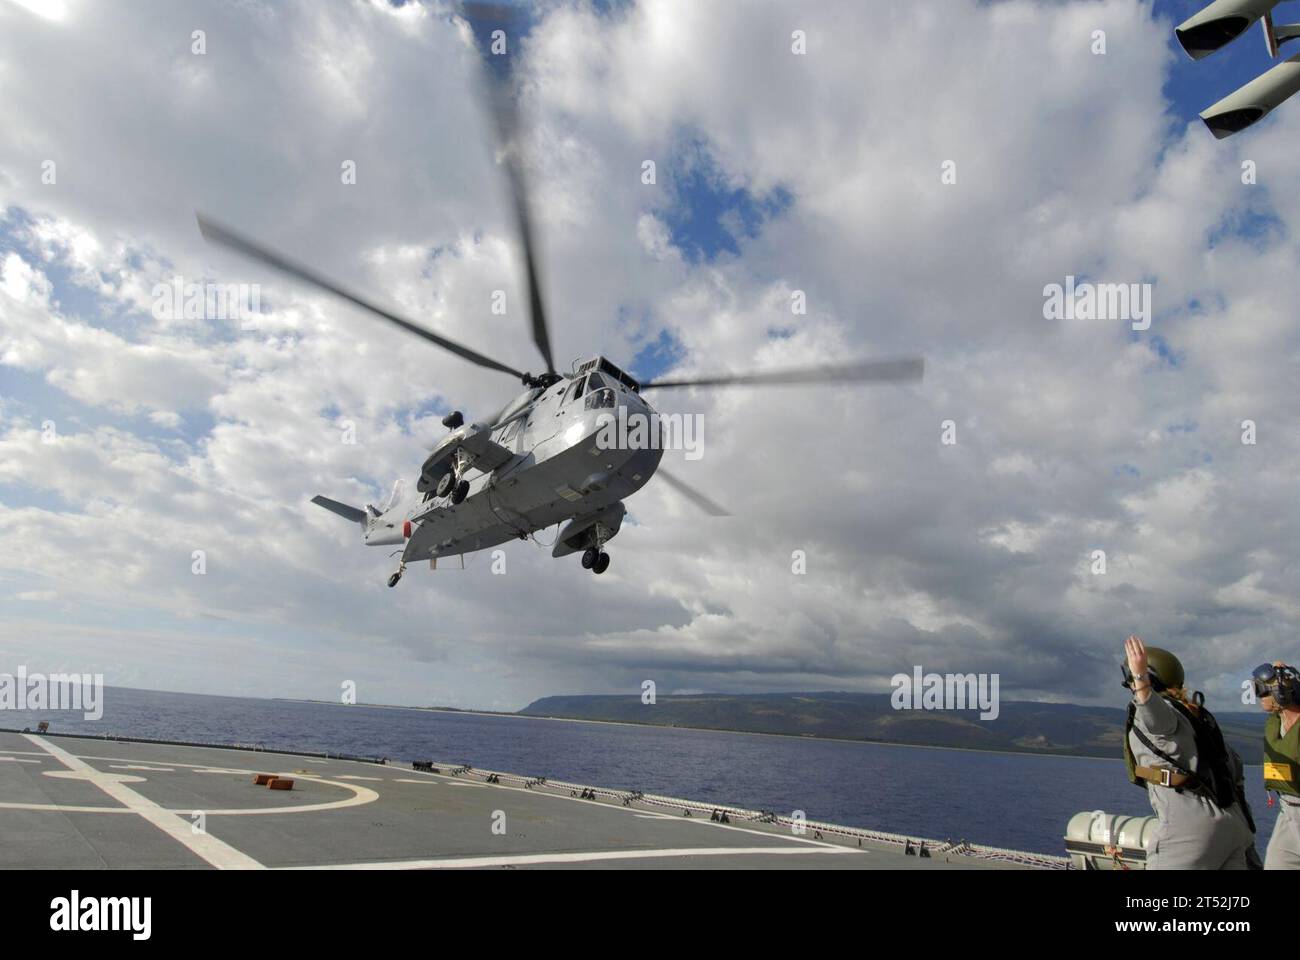 0807139671T-126 PACIFIC OCEAN (July 13, 2008) An RAN SH-3 Sea King takes off from the flight deck of Her Majesty's Australian amphibious ship HMAS Tobruk (LSH 50) during Exercise Rim of the Pacific (RIMPAC) 2008. RIMPAC is the worldХs largest multinational exercise and is scheduled biennially by the U.S. Pacific Fleet. Participants include the U.S., Australia, Canada, Chile, Japan, Netherlands, Peru, Republic of Korea, Singapore and the United Kingdom. Navy Stock Photo